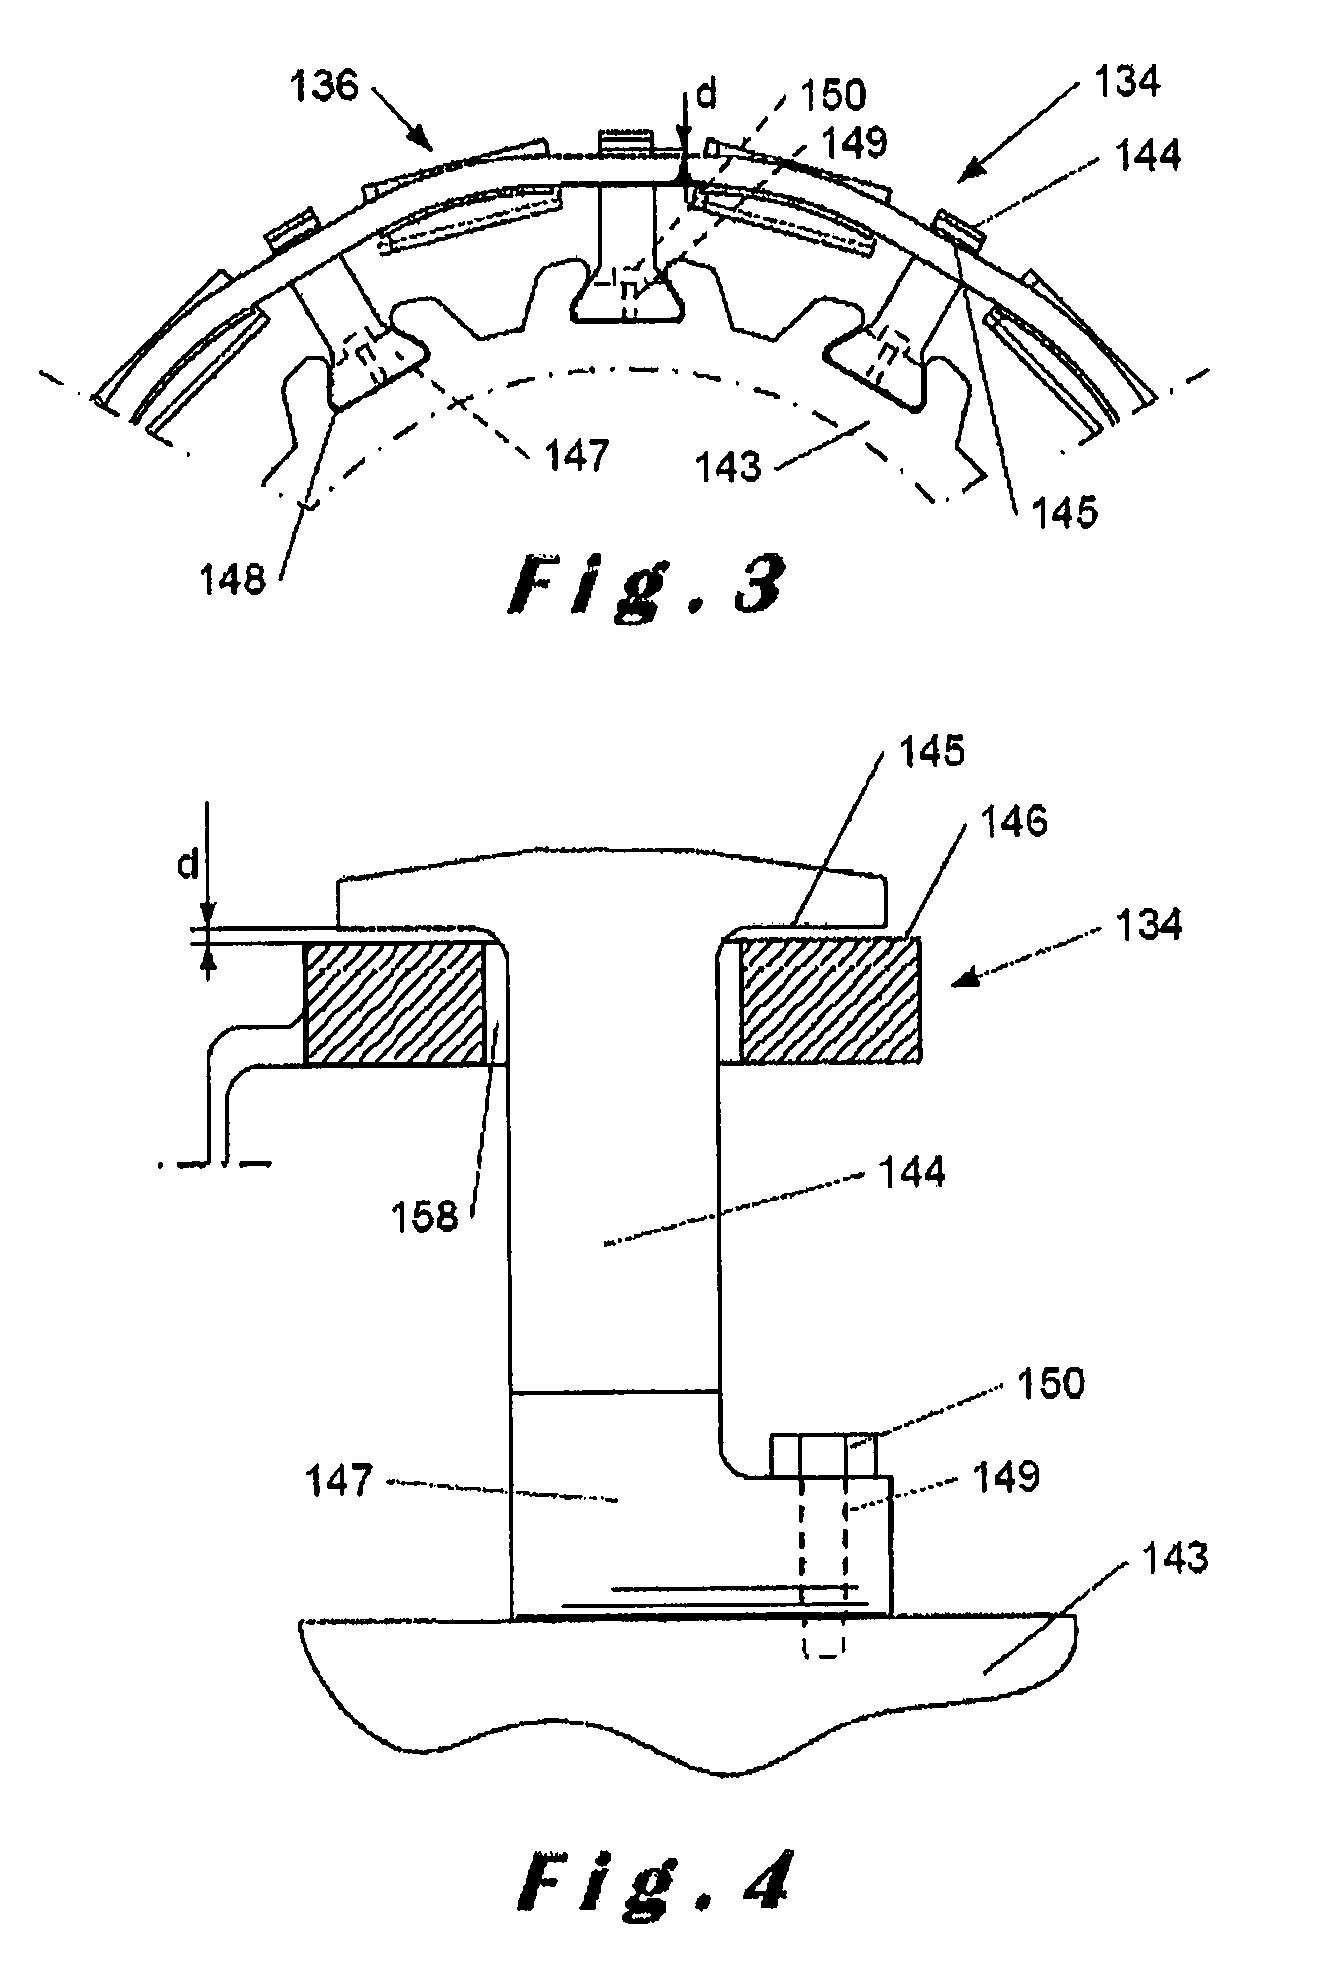 Hub for a propeller having variable pitch blades